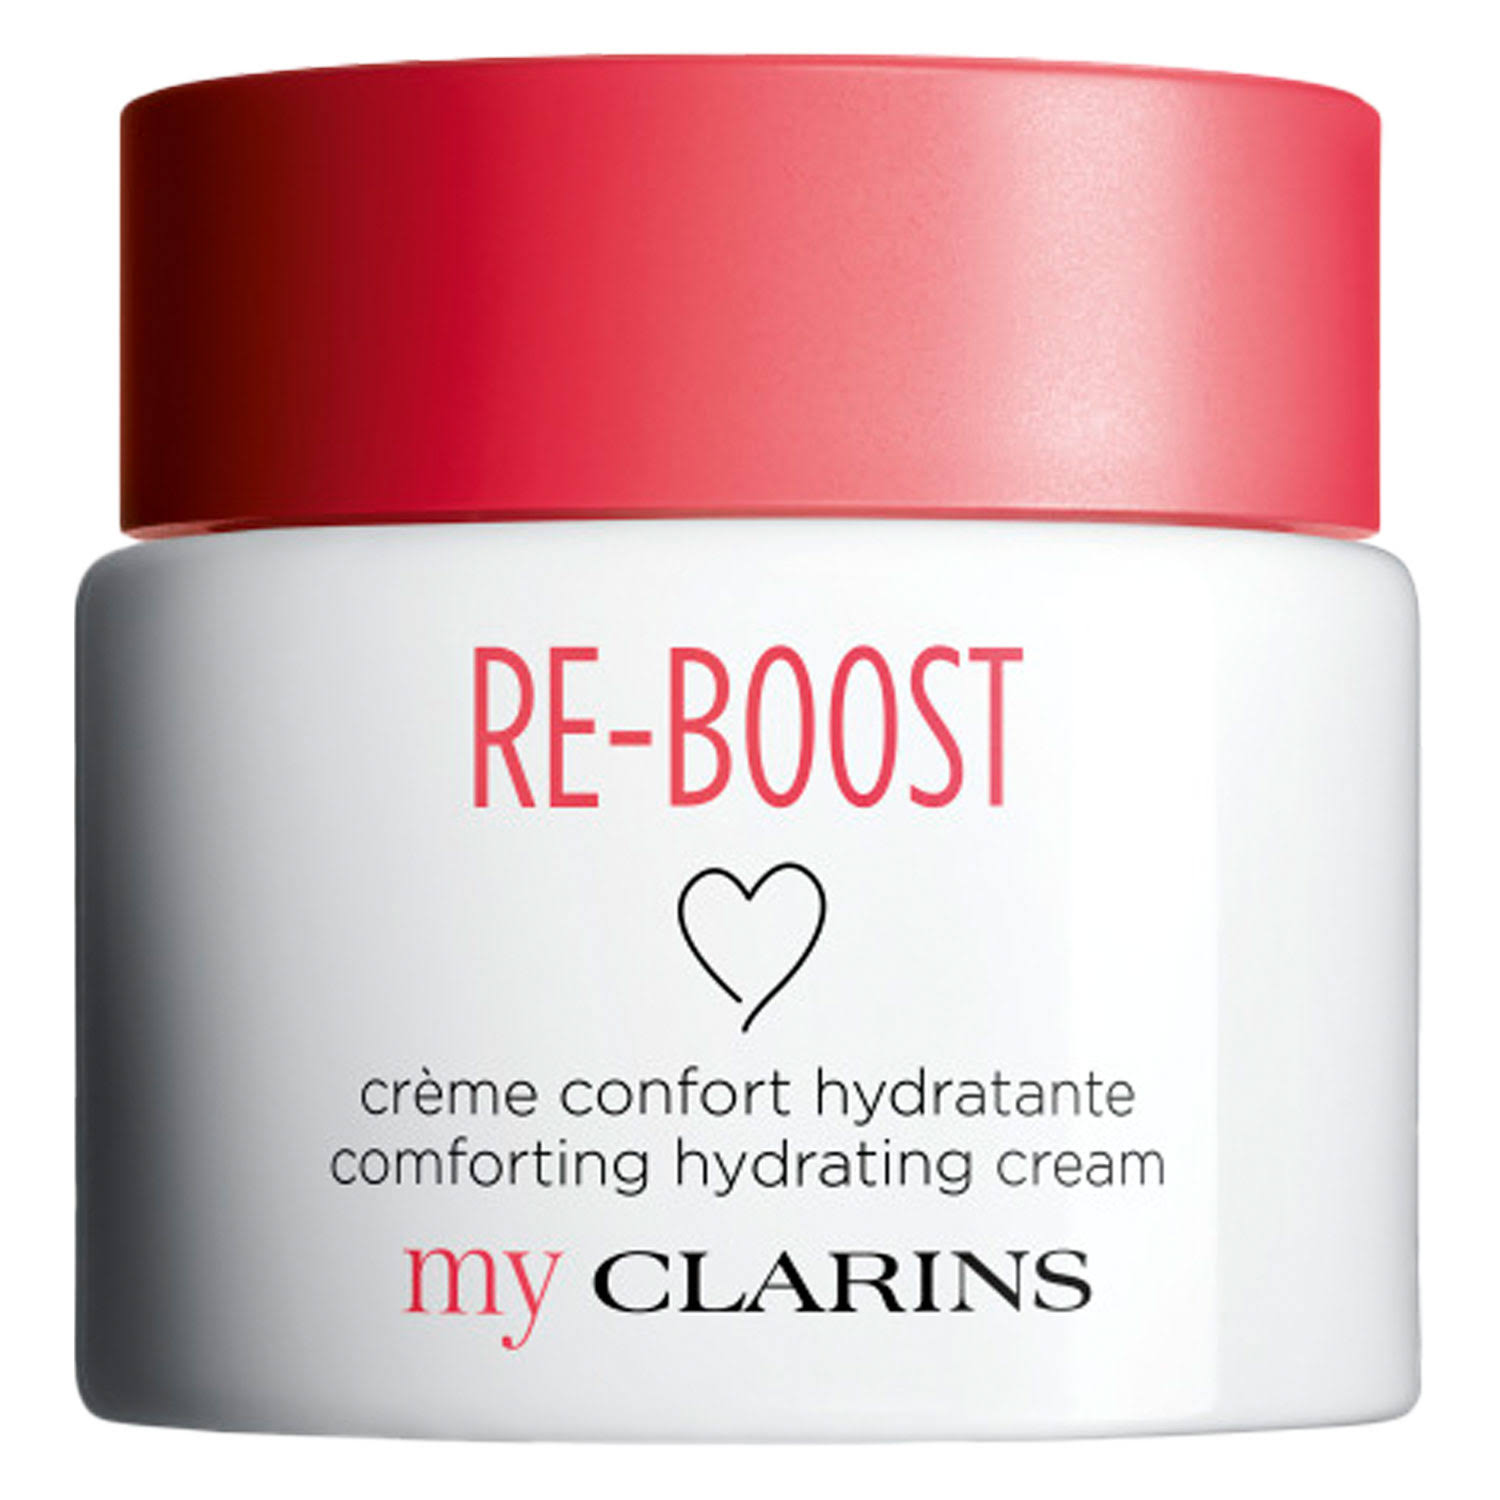 My Clarins Re-Boost Comforting Hydrating Cream, 50 ml